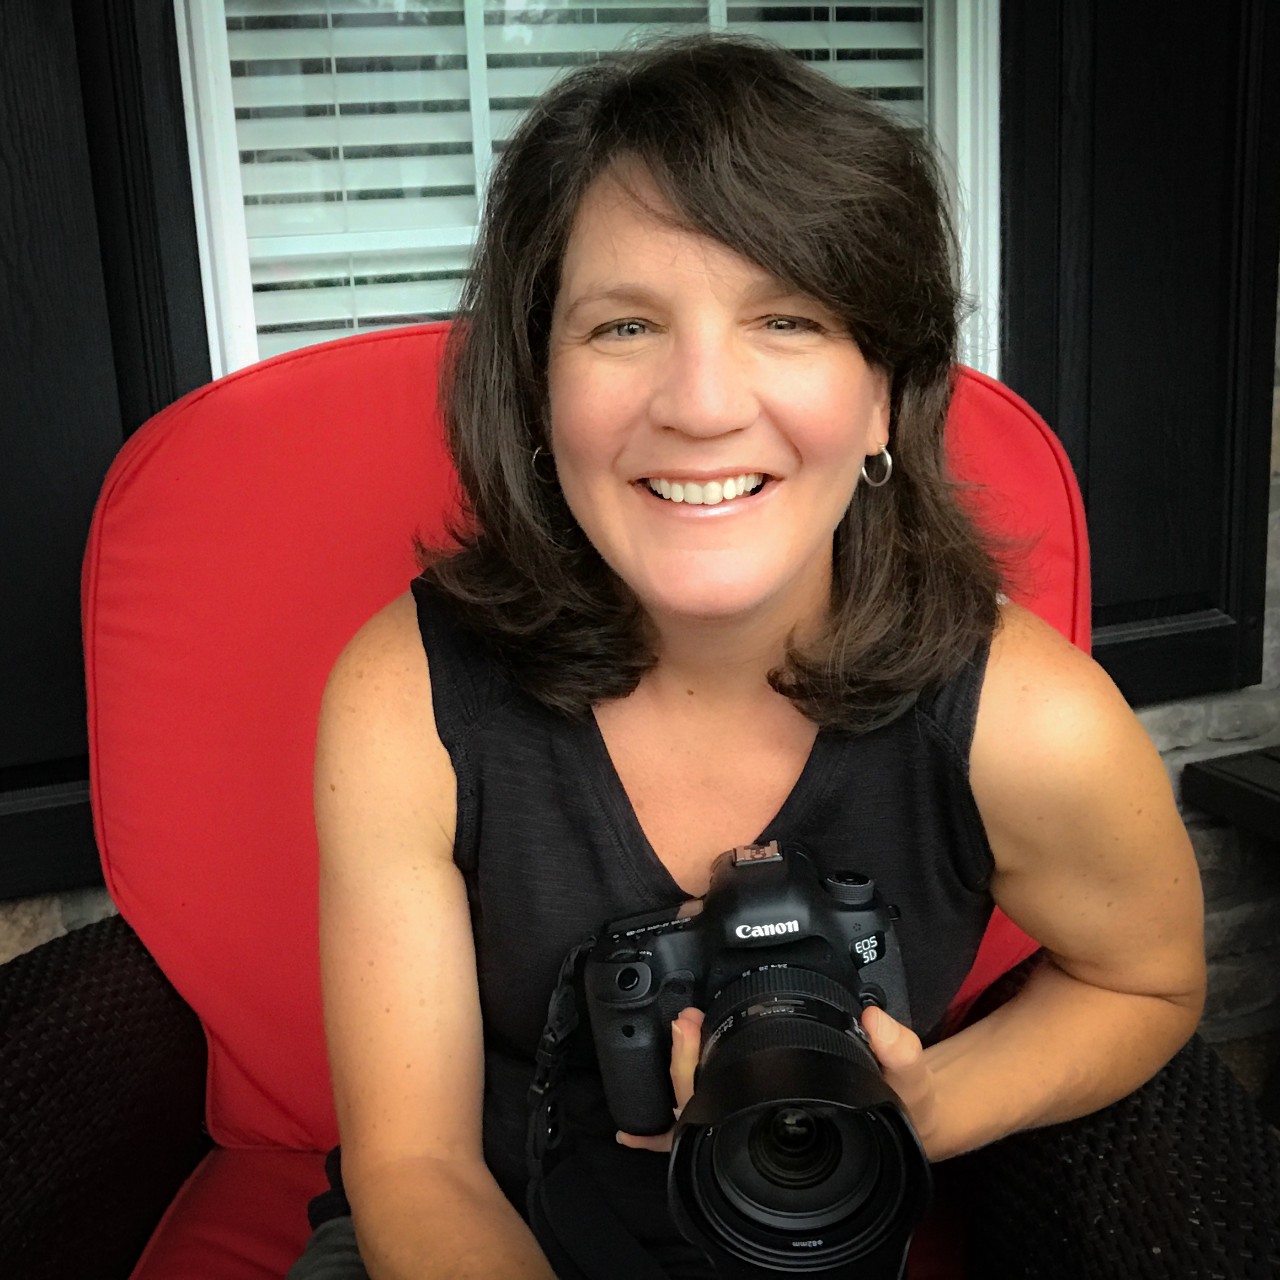 self-portrait of the article author and photographer, Jen Vogus. She is seated in a red chair holding very large camera with a big lens.